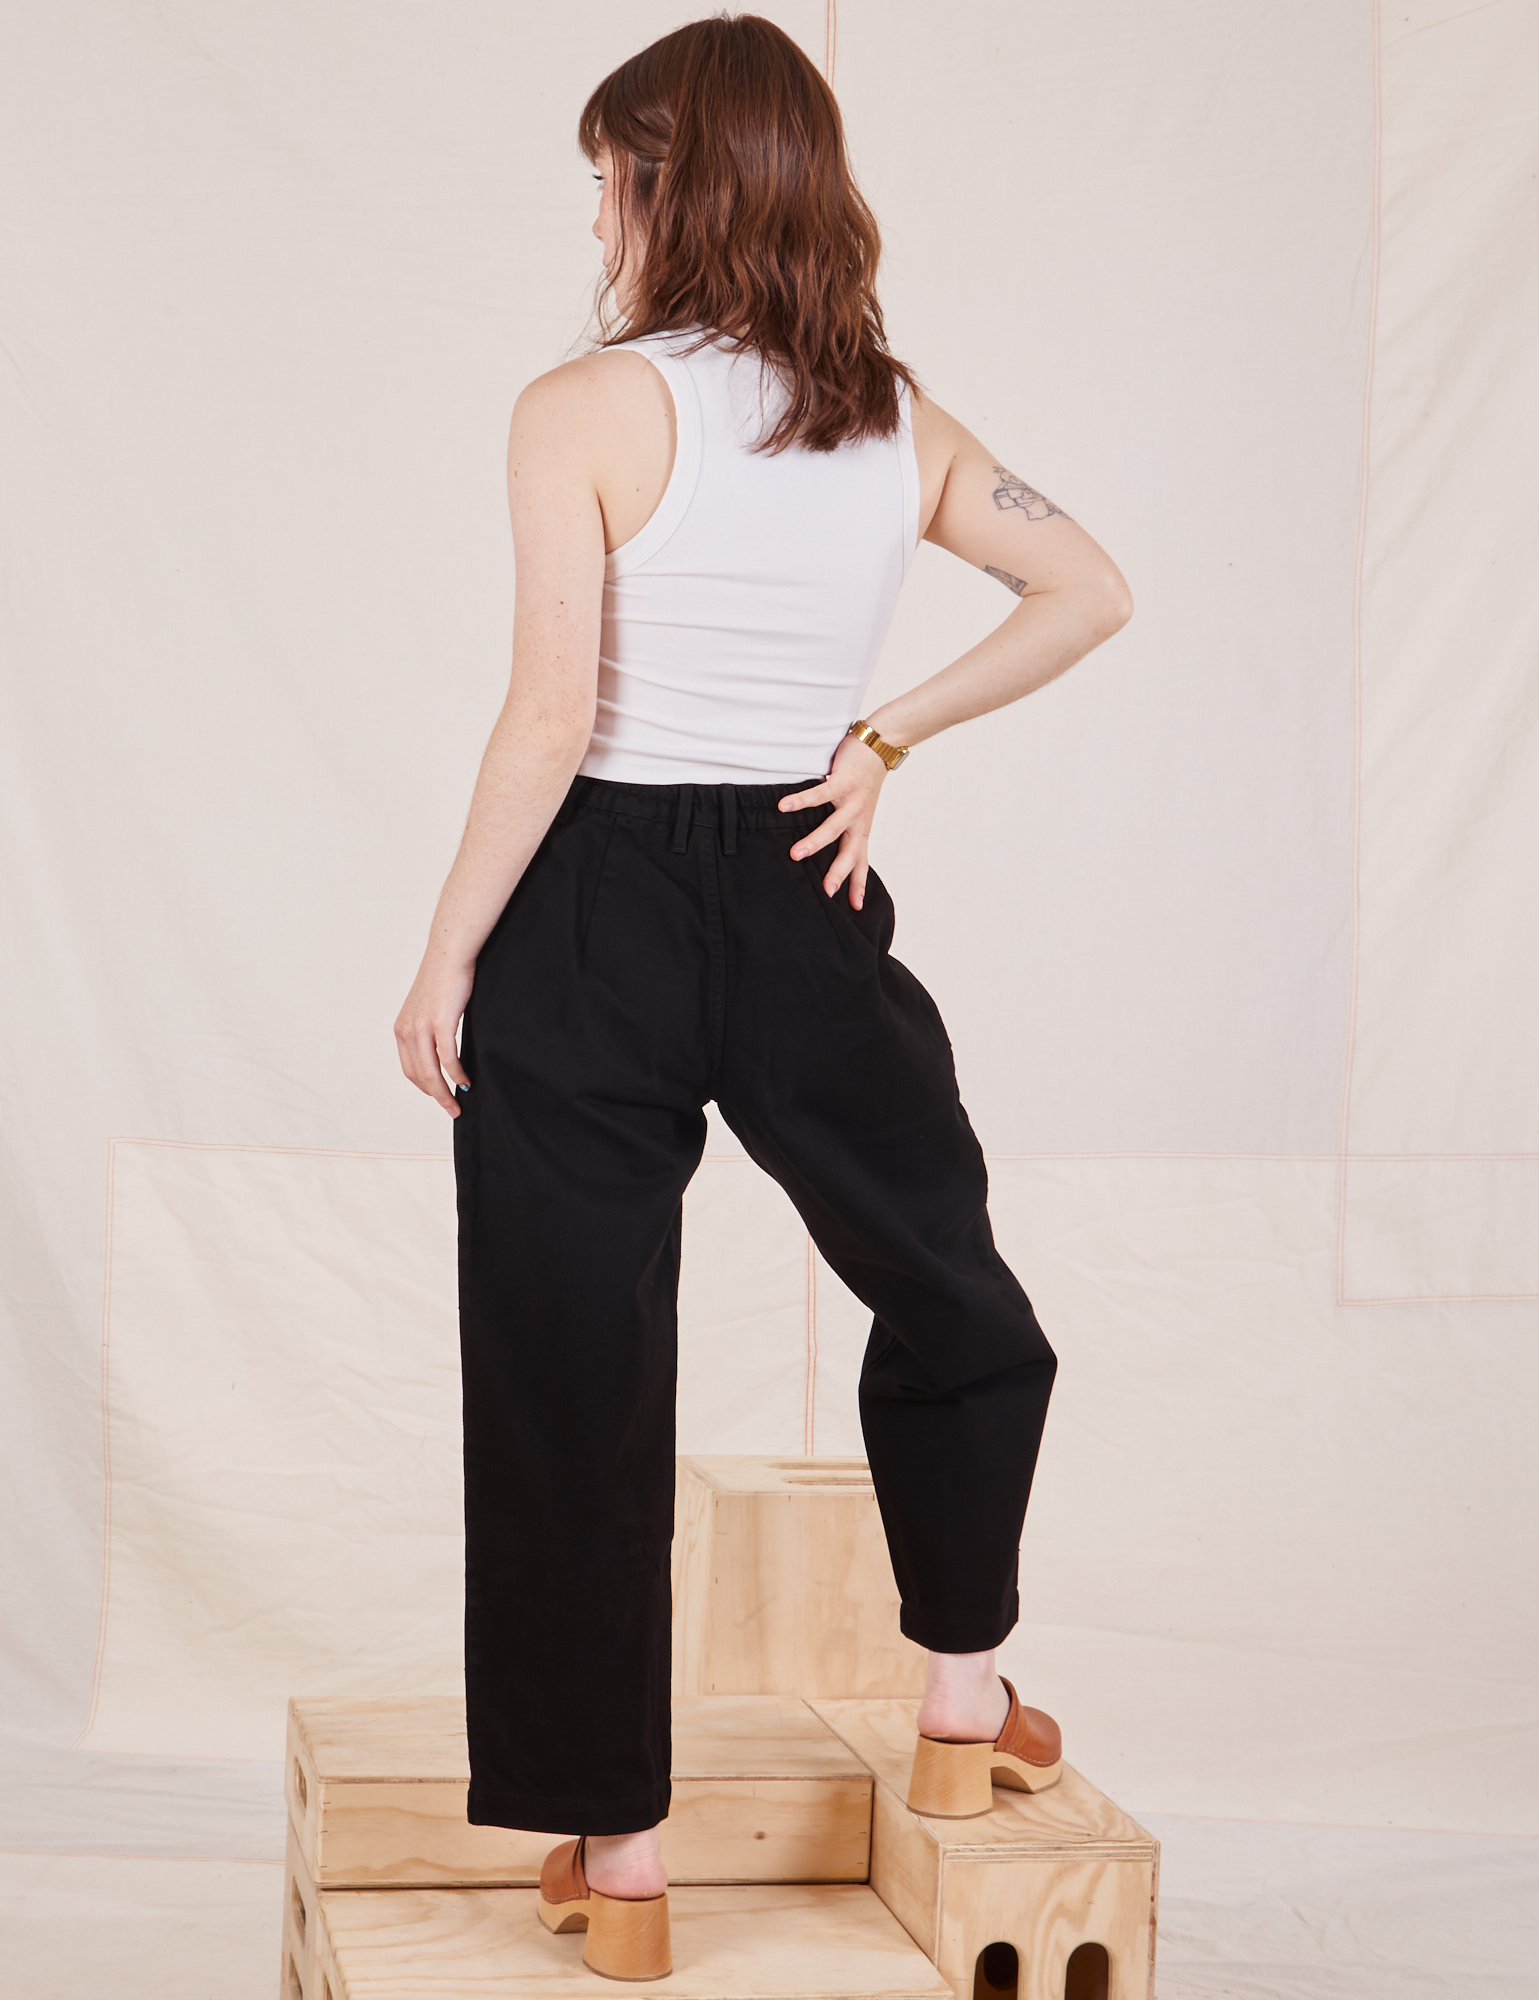 Back view of Denim Trouser Jeans in Black with Cropped Tank Top in vintage tee off-white on Hana